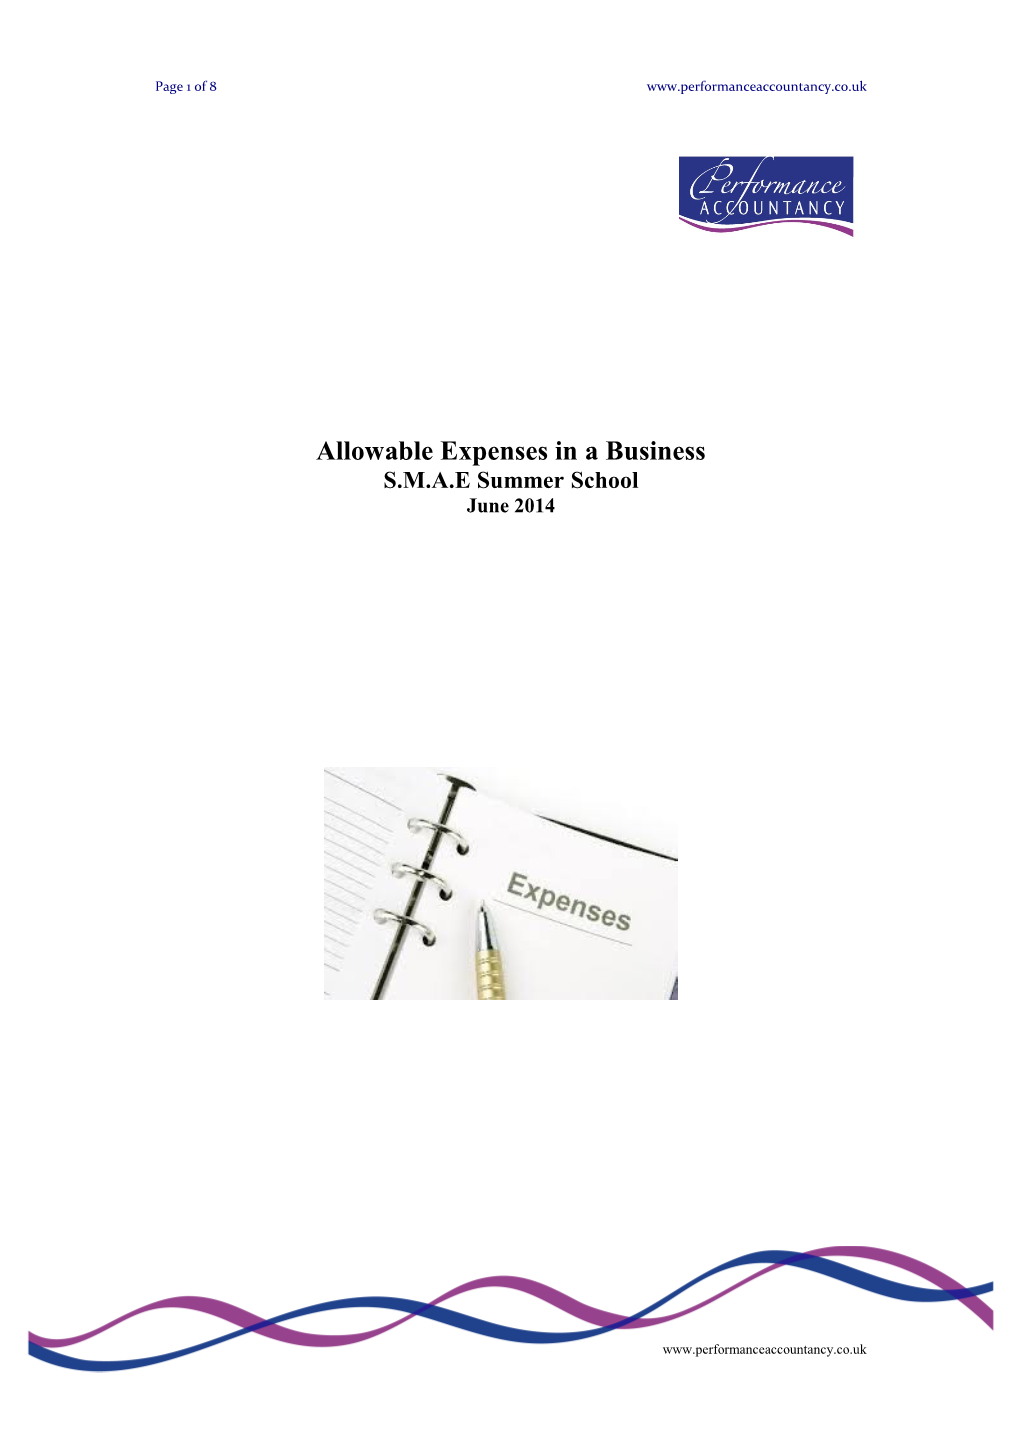 Allowable Expenses in a Business